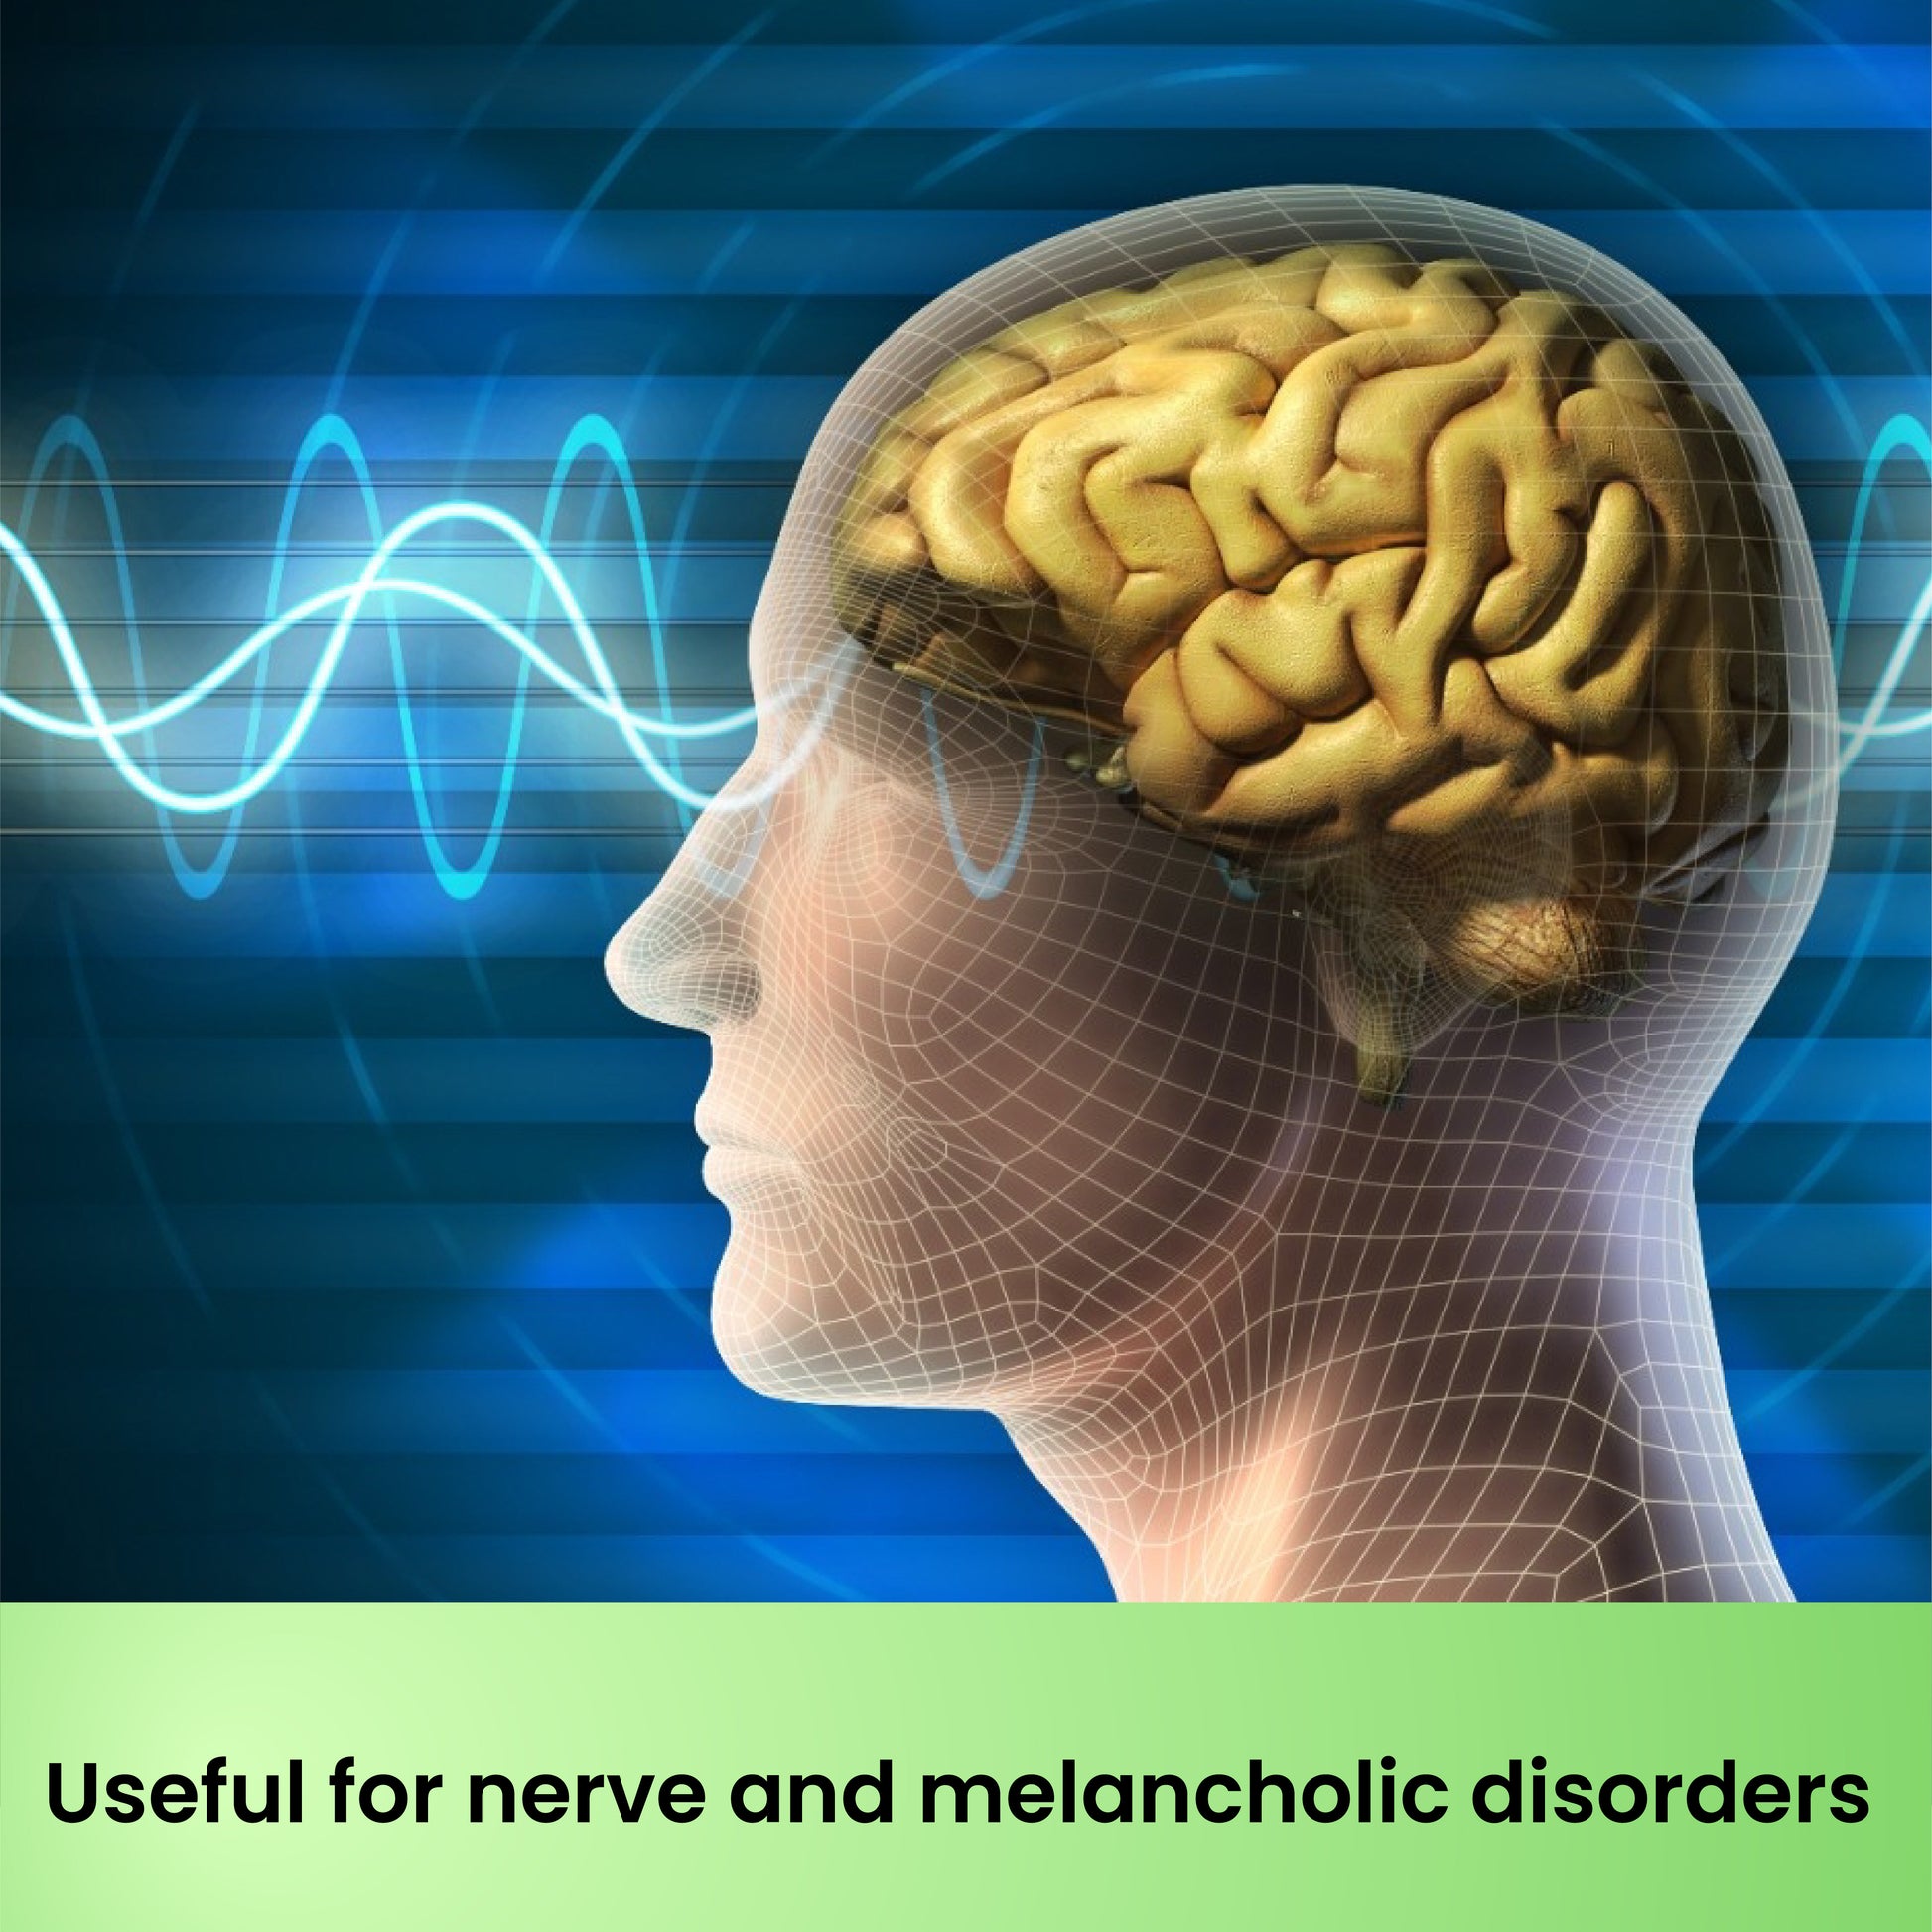 Useful for nerve and melancholic disorders